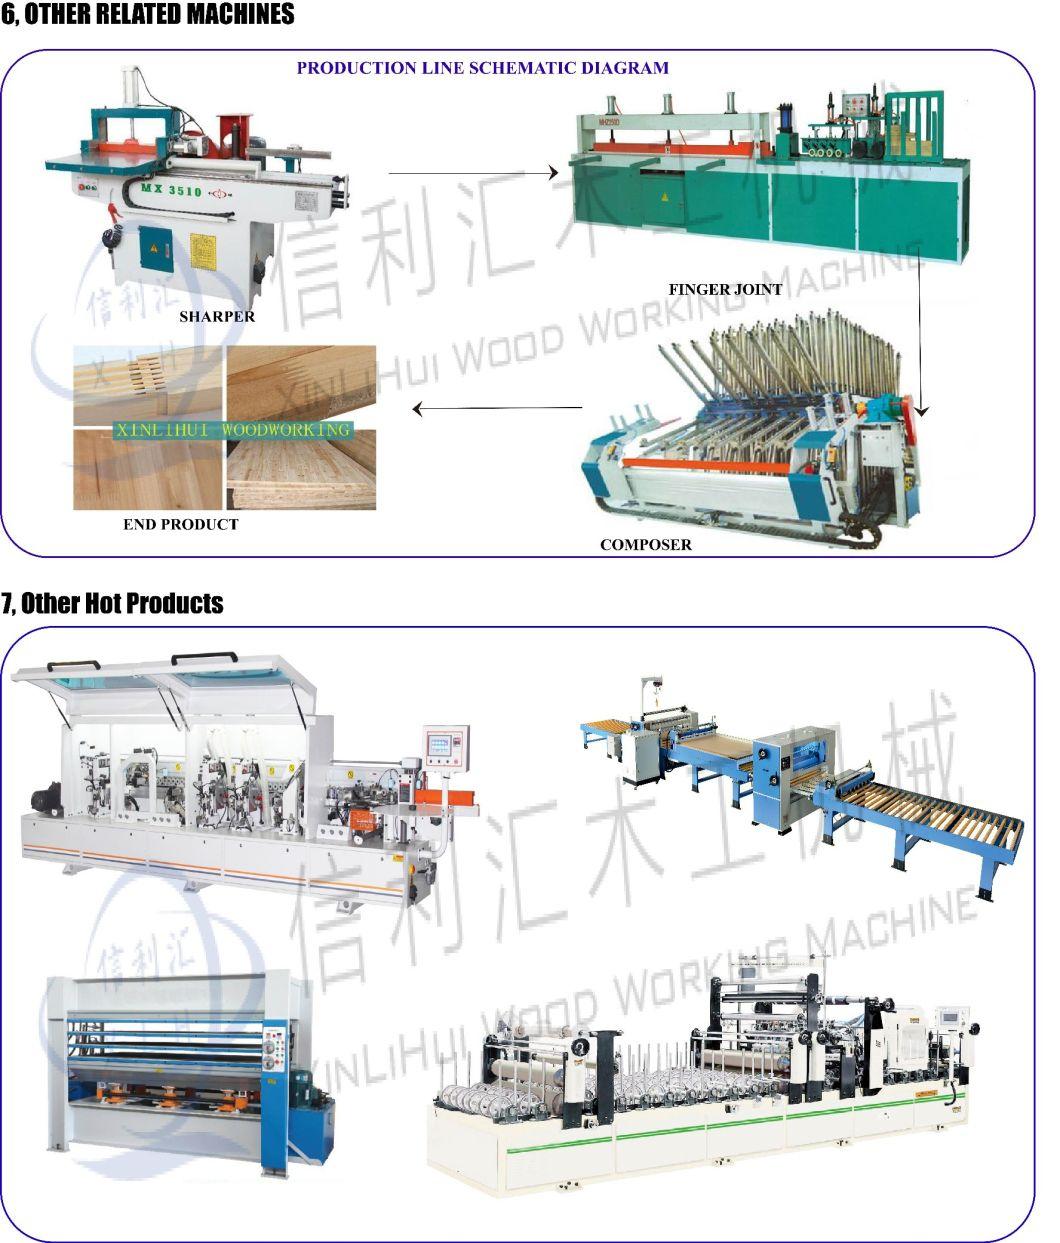 China Production Line Multi Blade Wood Saw Machine for Logs Boards Cutting Multiple Straight Line Rip Saw Woodworking Machinery